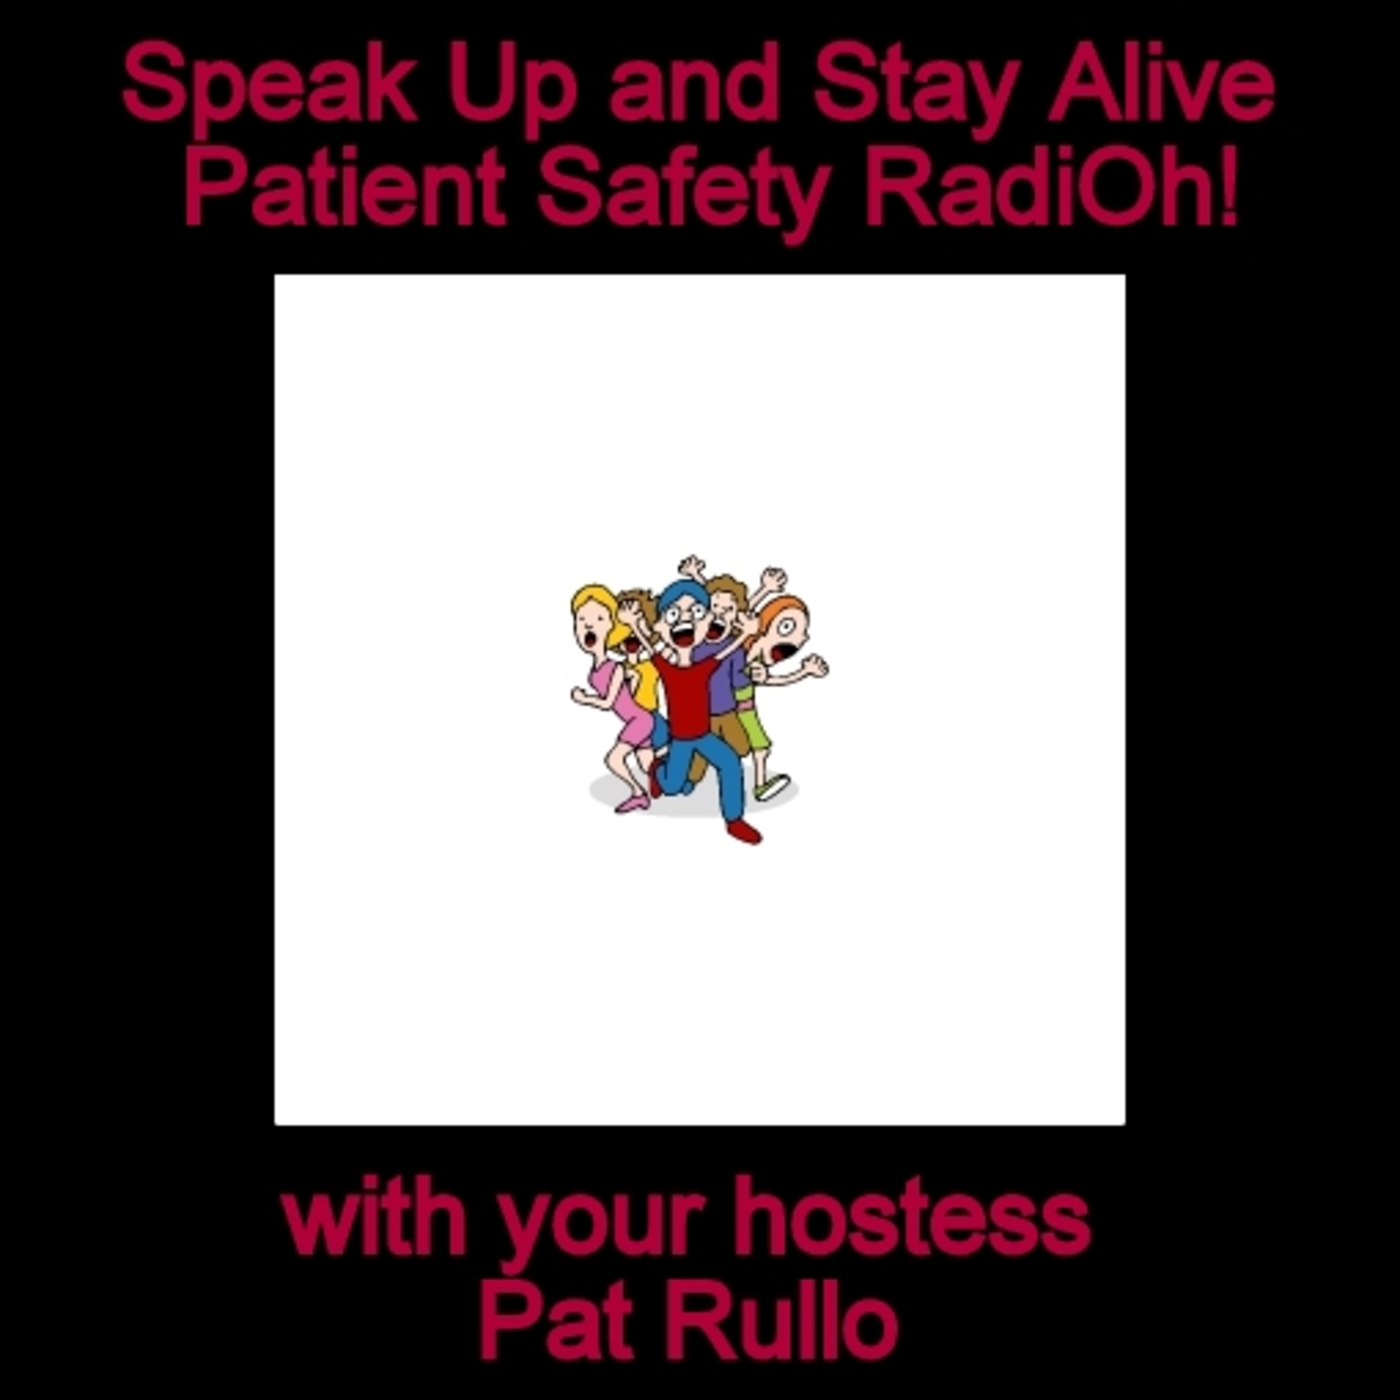 SPEAK UP AND STAY ALIVE PATIENT SAFETY RADIO